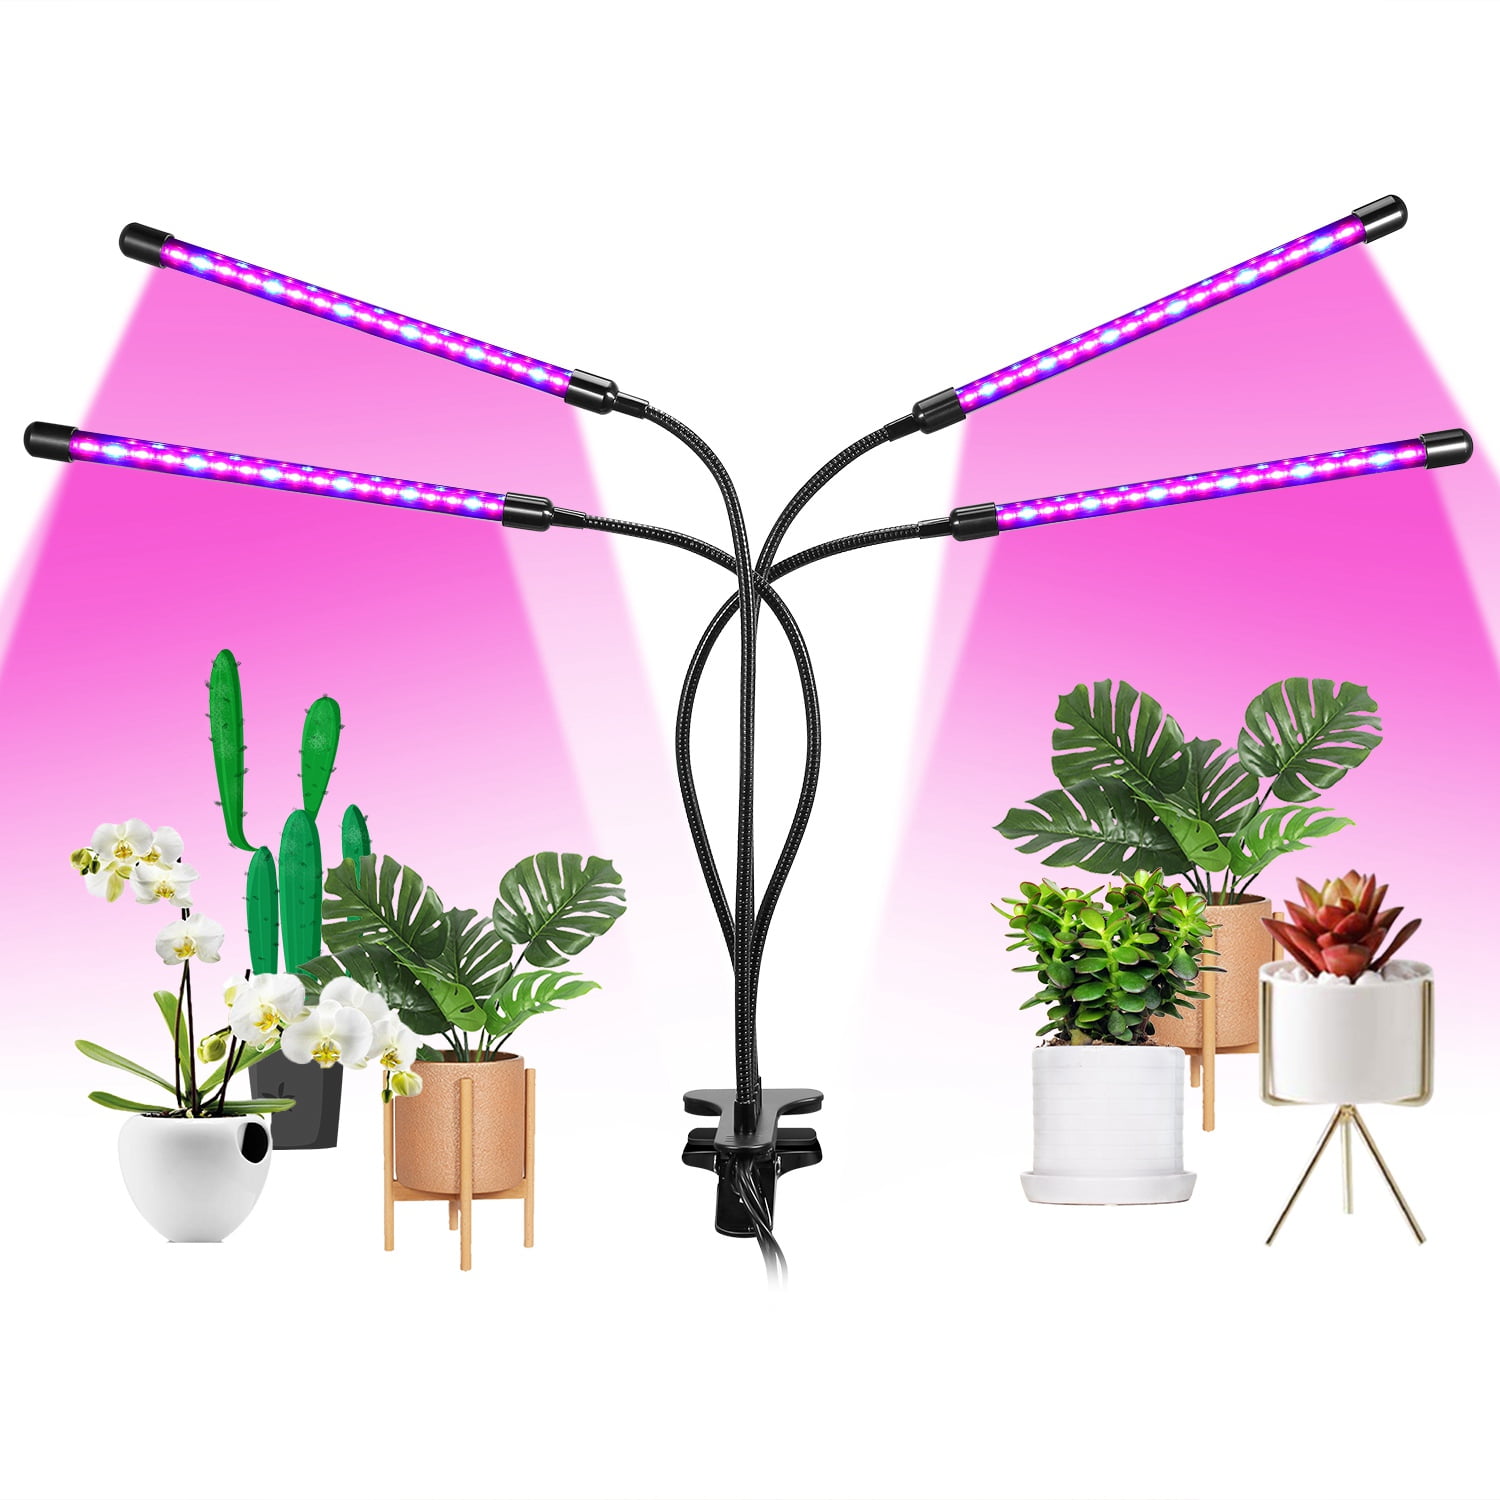 Full Spectrum 144LED Grow Light Plant Growing Lamp for Indoor Plant Hydroponics 